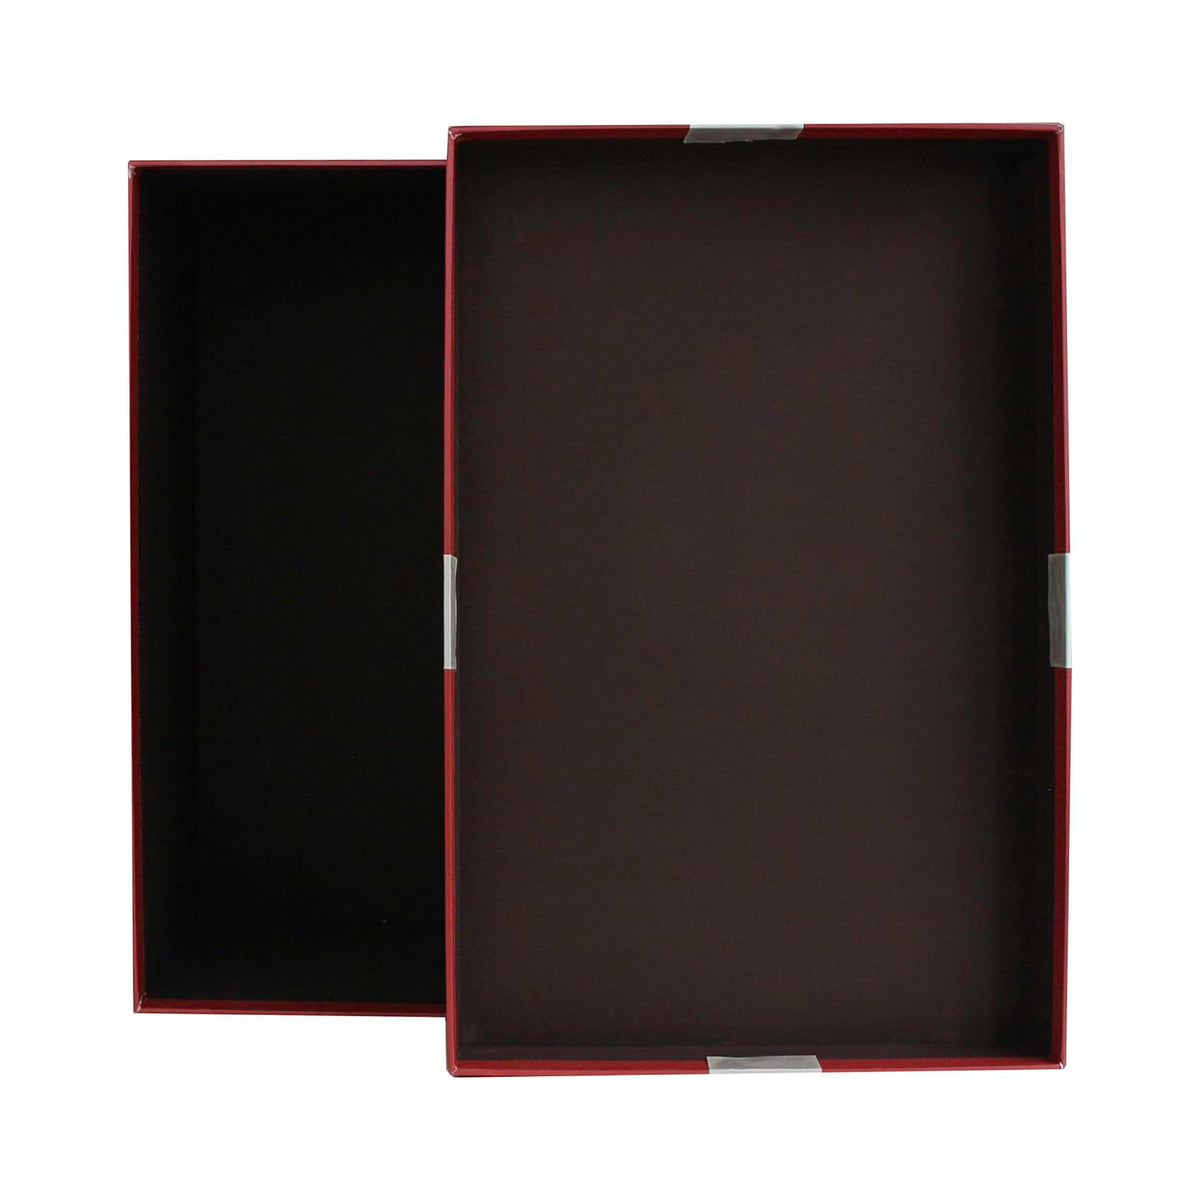 Durable and Preassembled Red Gift Boxes by Emartbuy